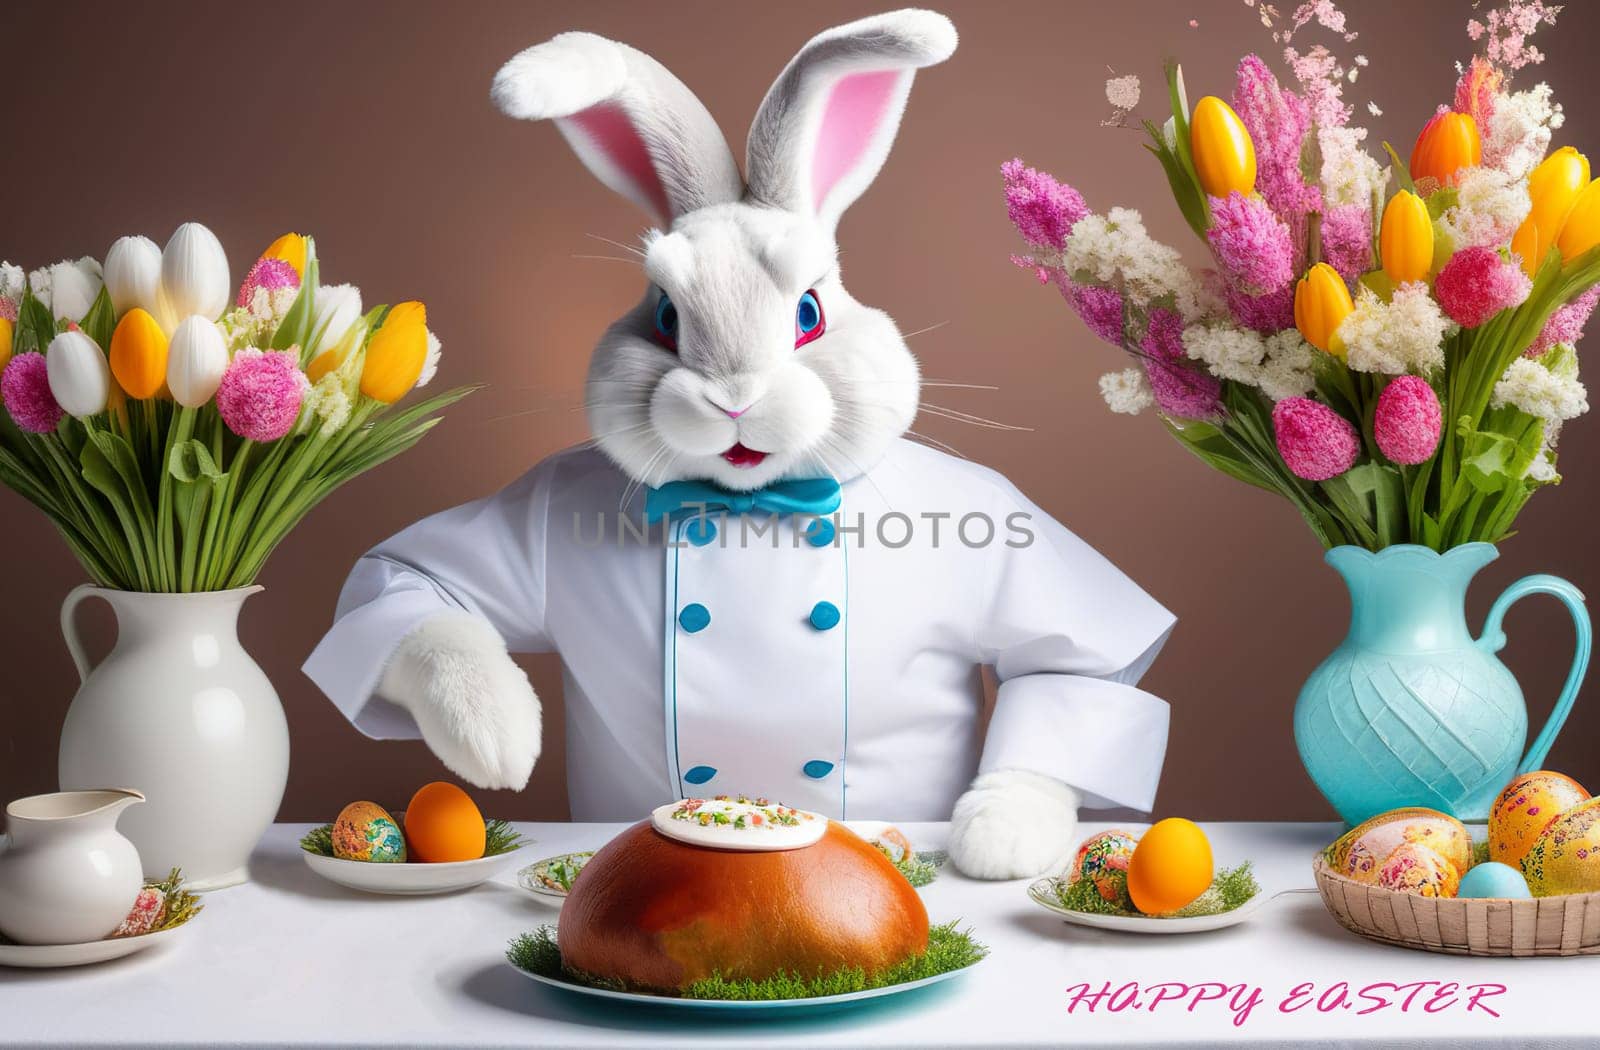 fabulous Easter Bunny in a chef's robe and hat invites you to a served Easter table. Easter card.